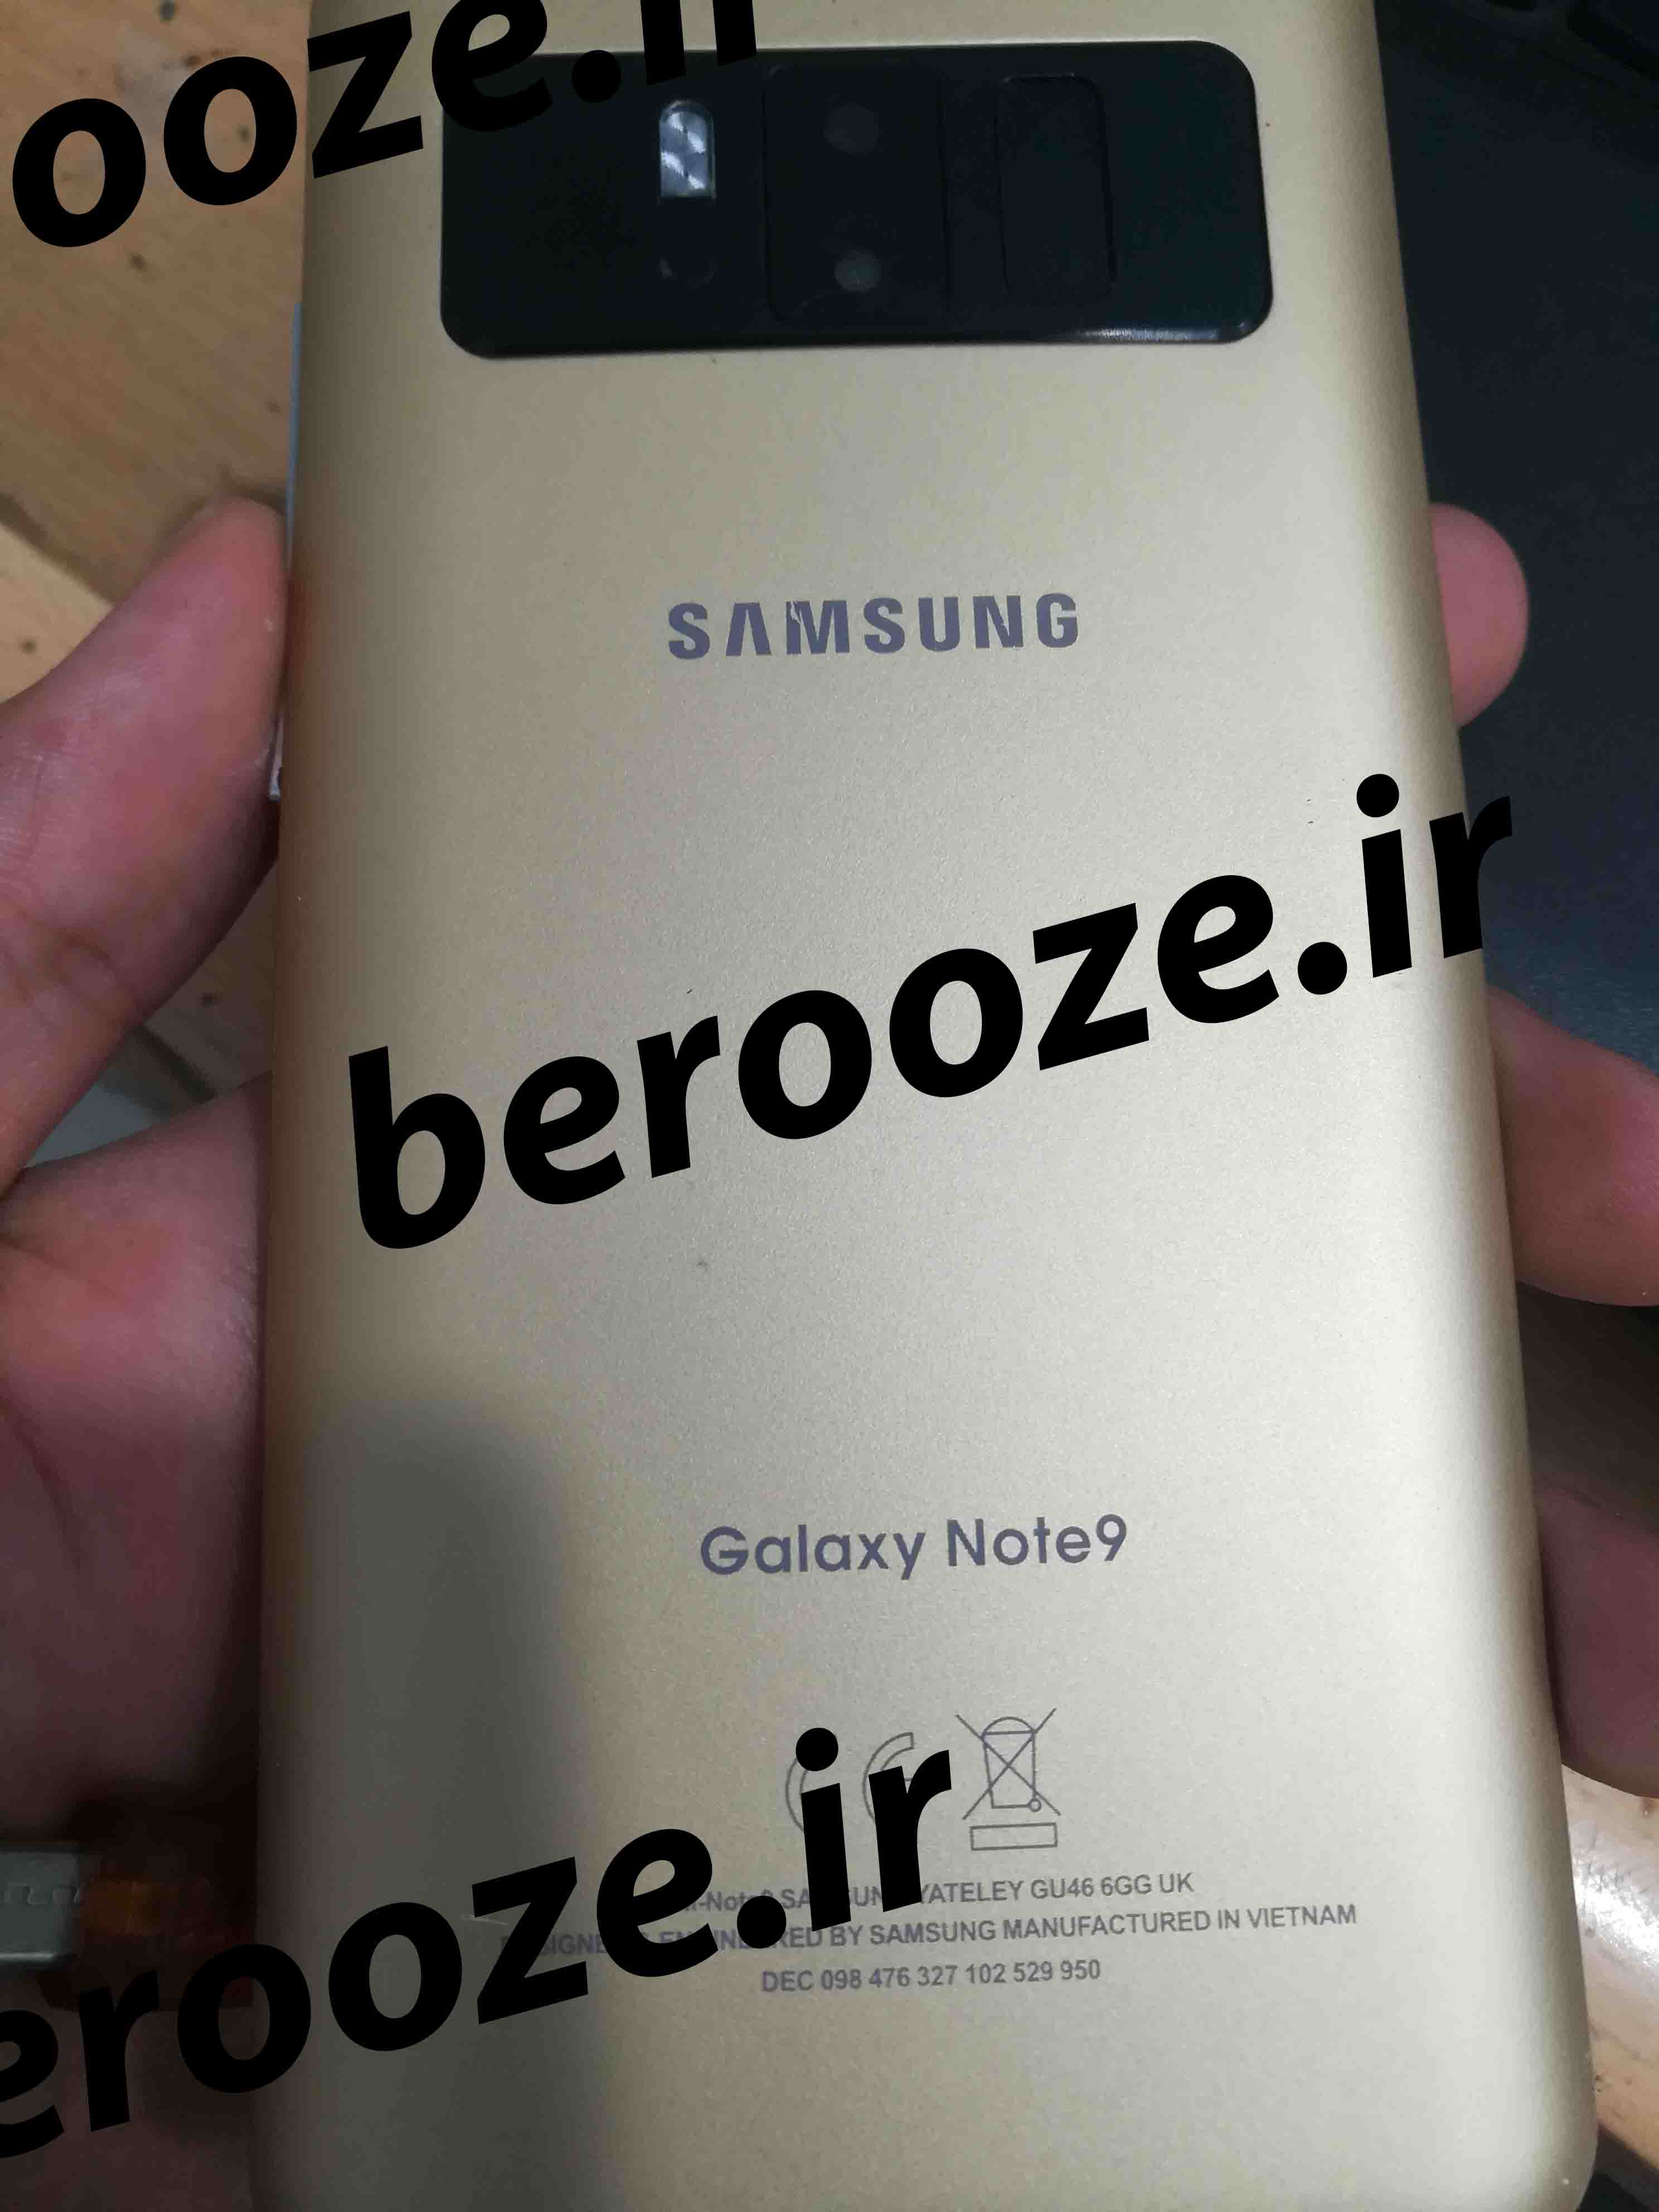 Note 9 MT6580 firmware